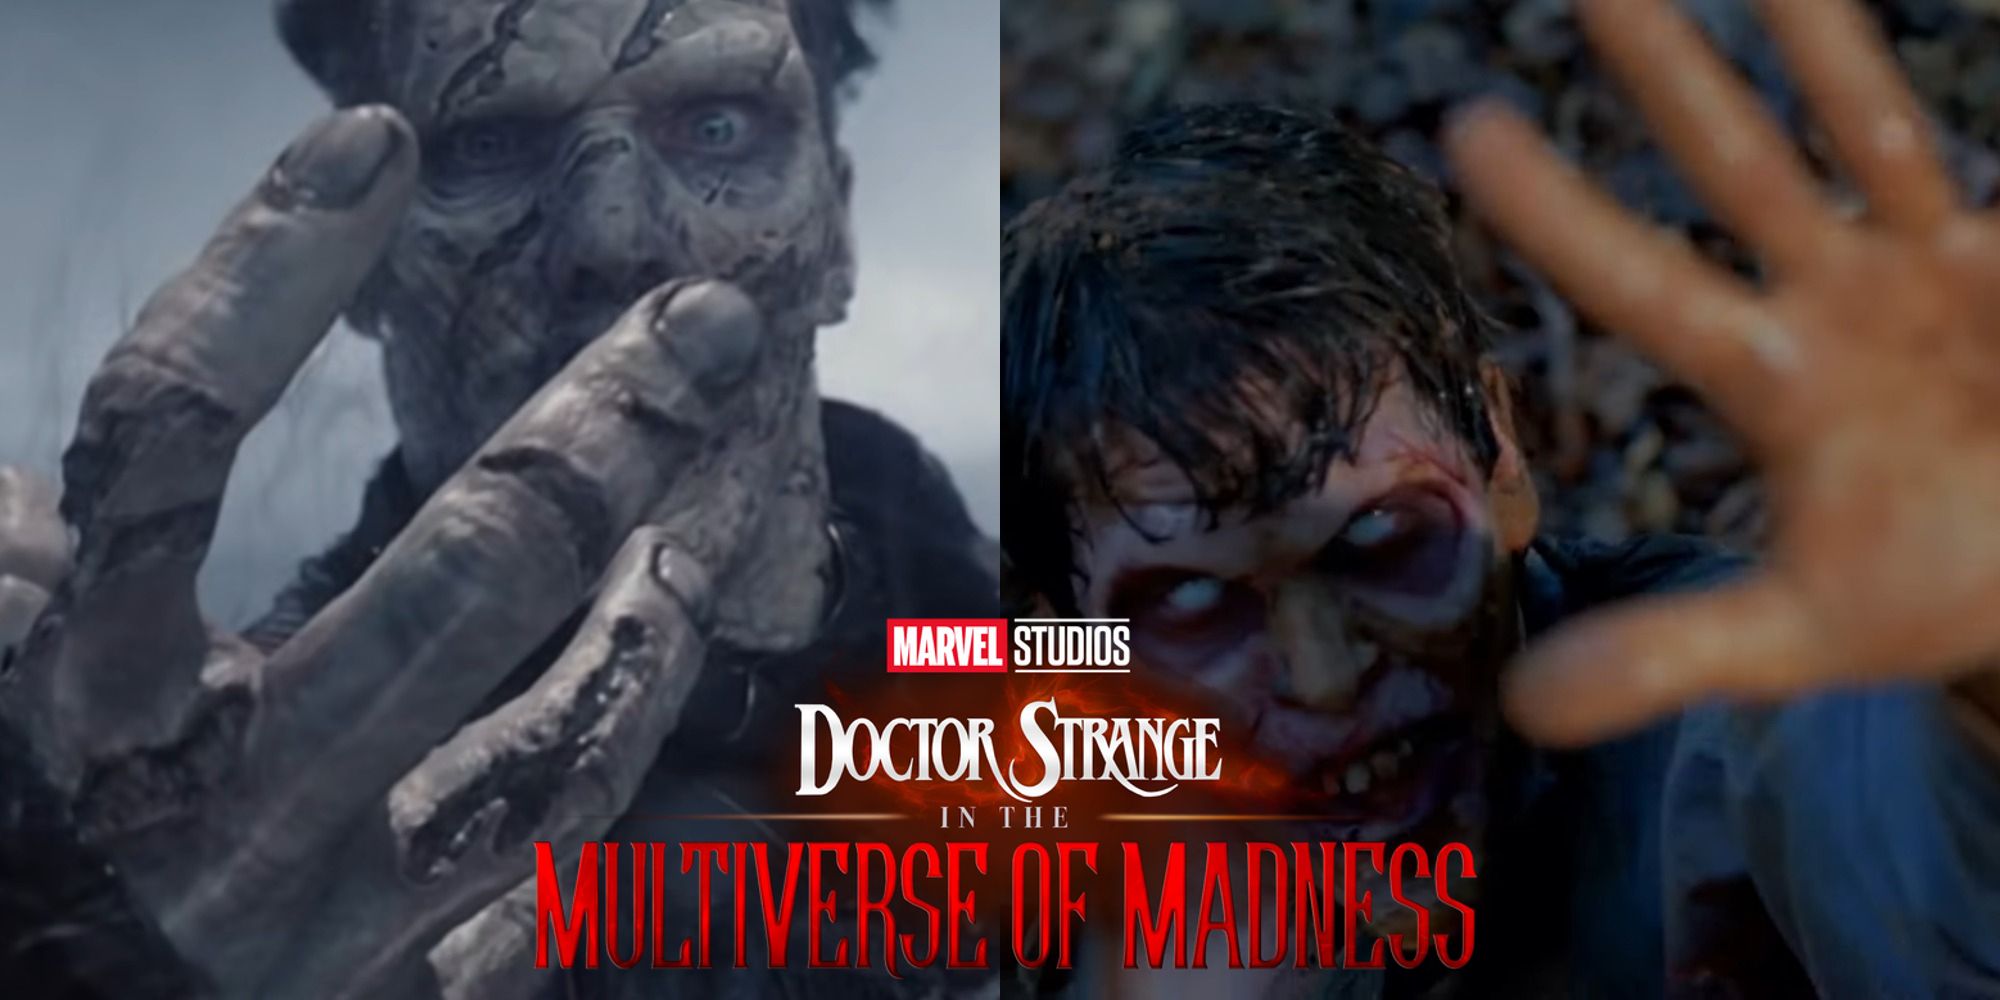 Split image of Zombie Strange from Doctor Strange In The Multiverse Of Madness and Possessed Ash in Evil Dead II Dead By Dawn